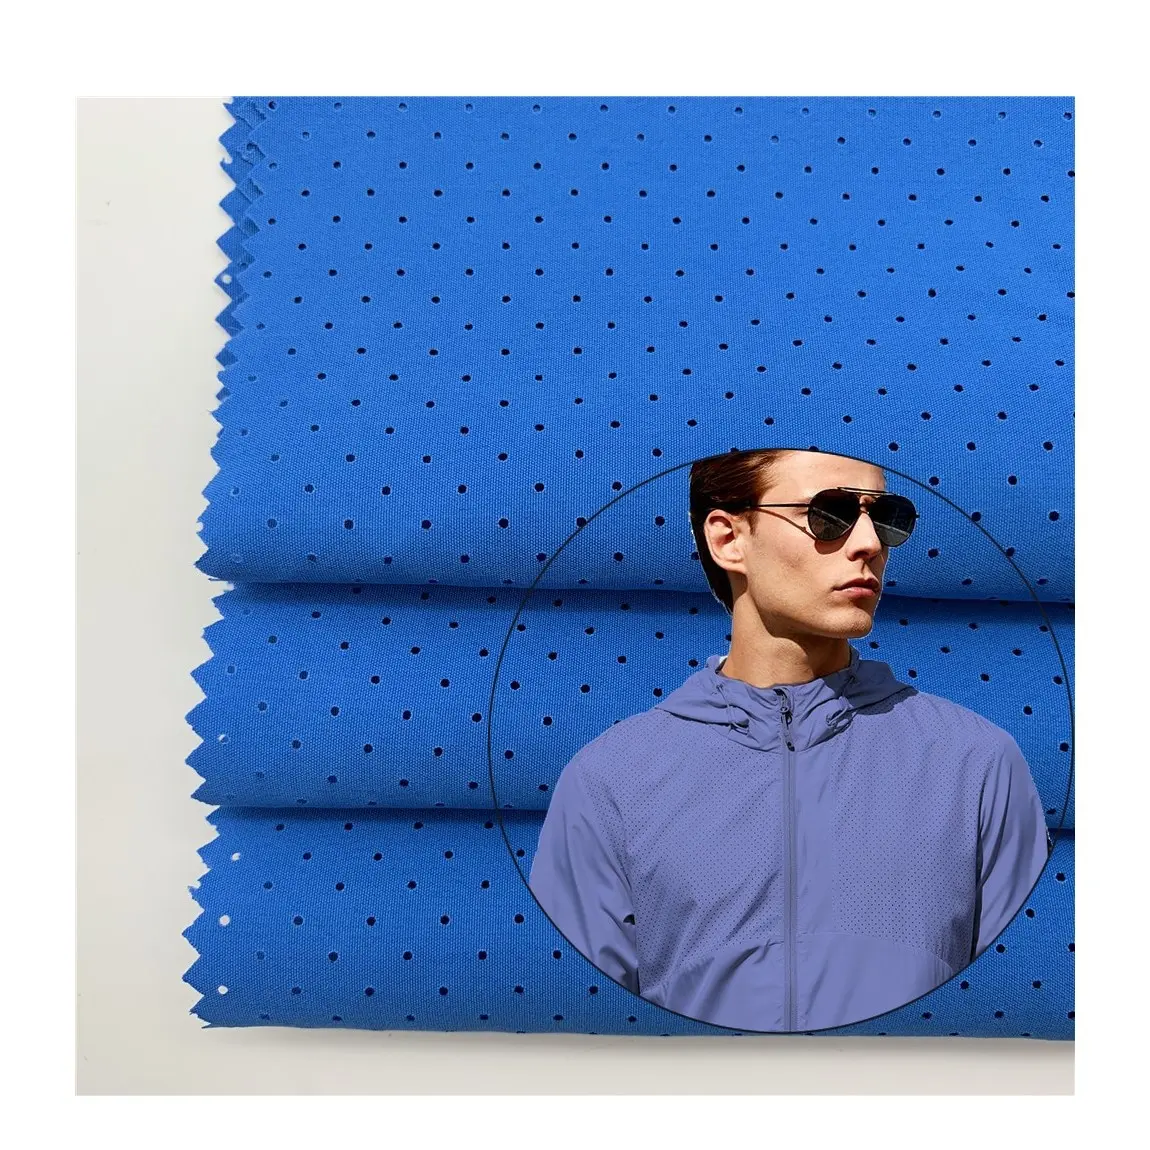 Polyester laser cutting fabric breathable small dots summer shirt material